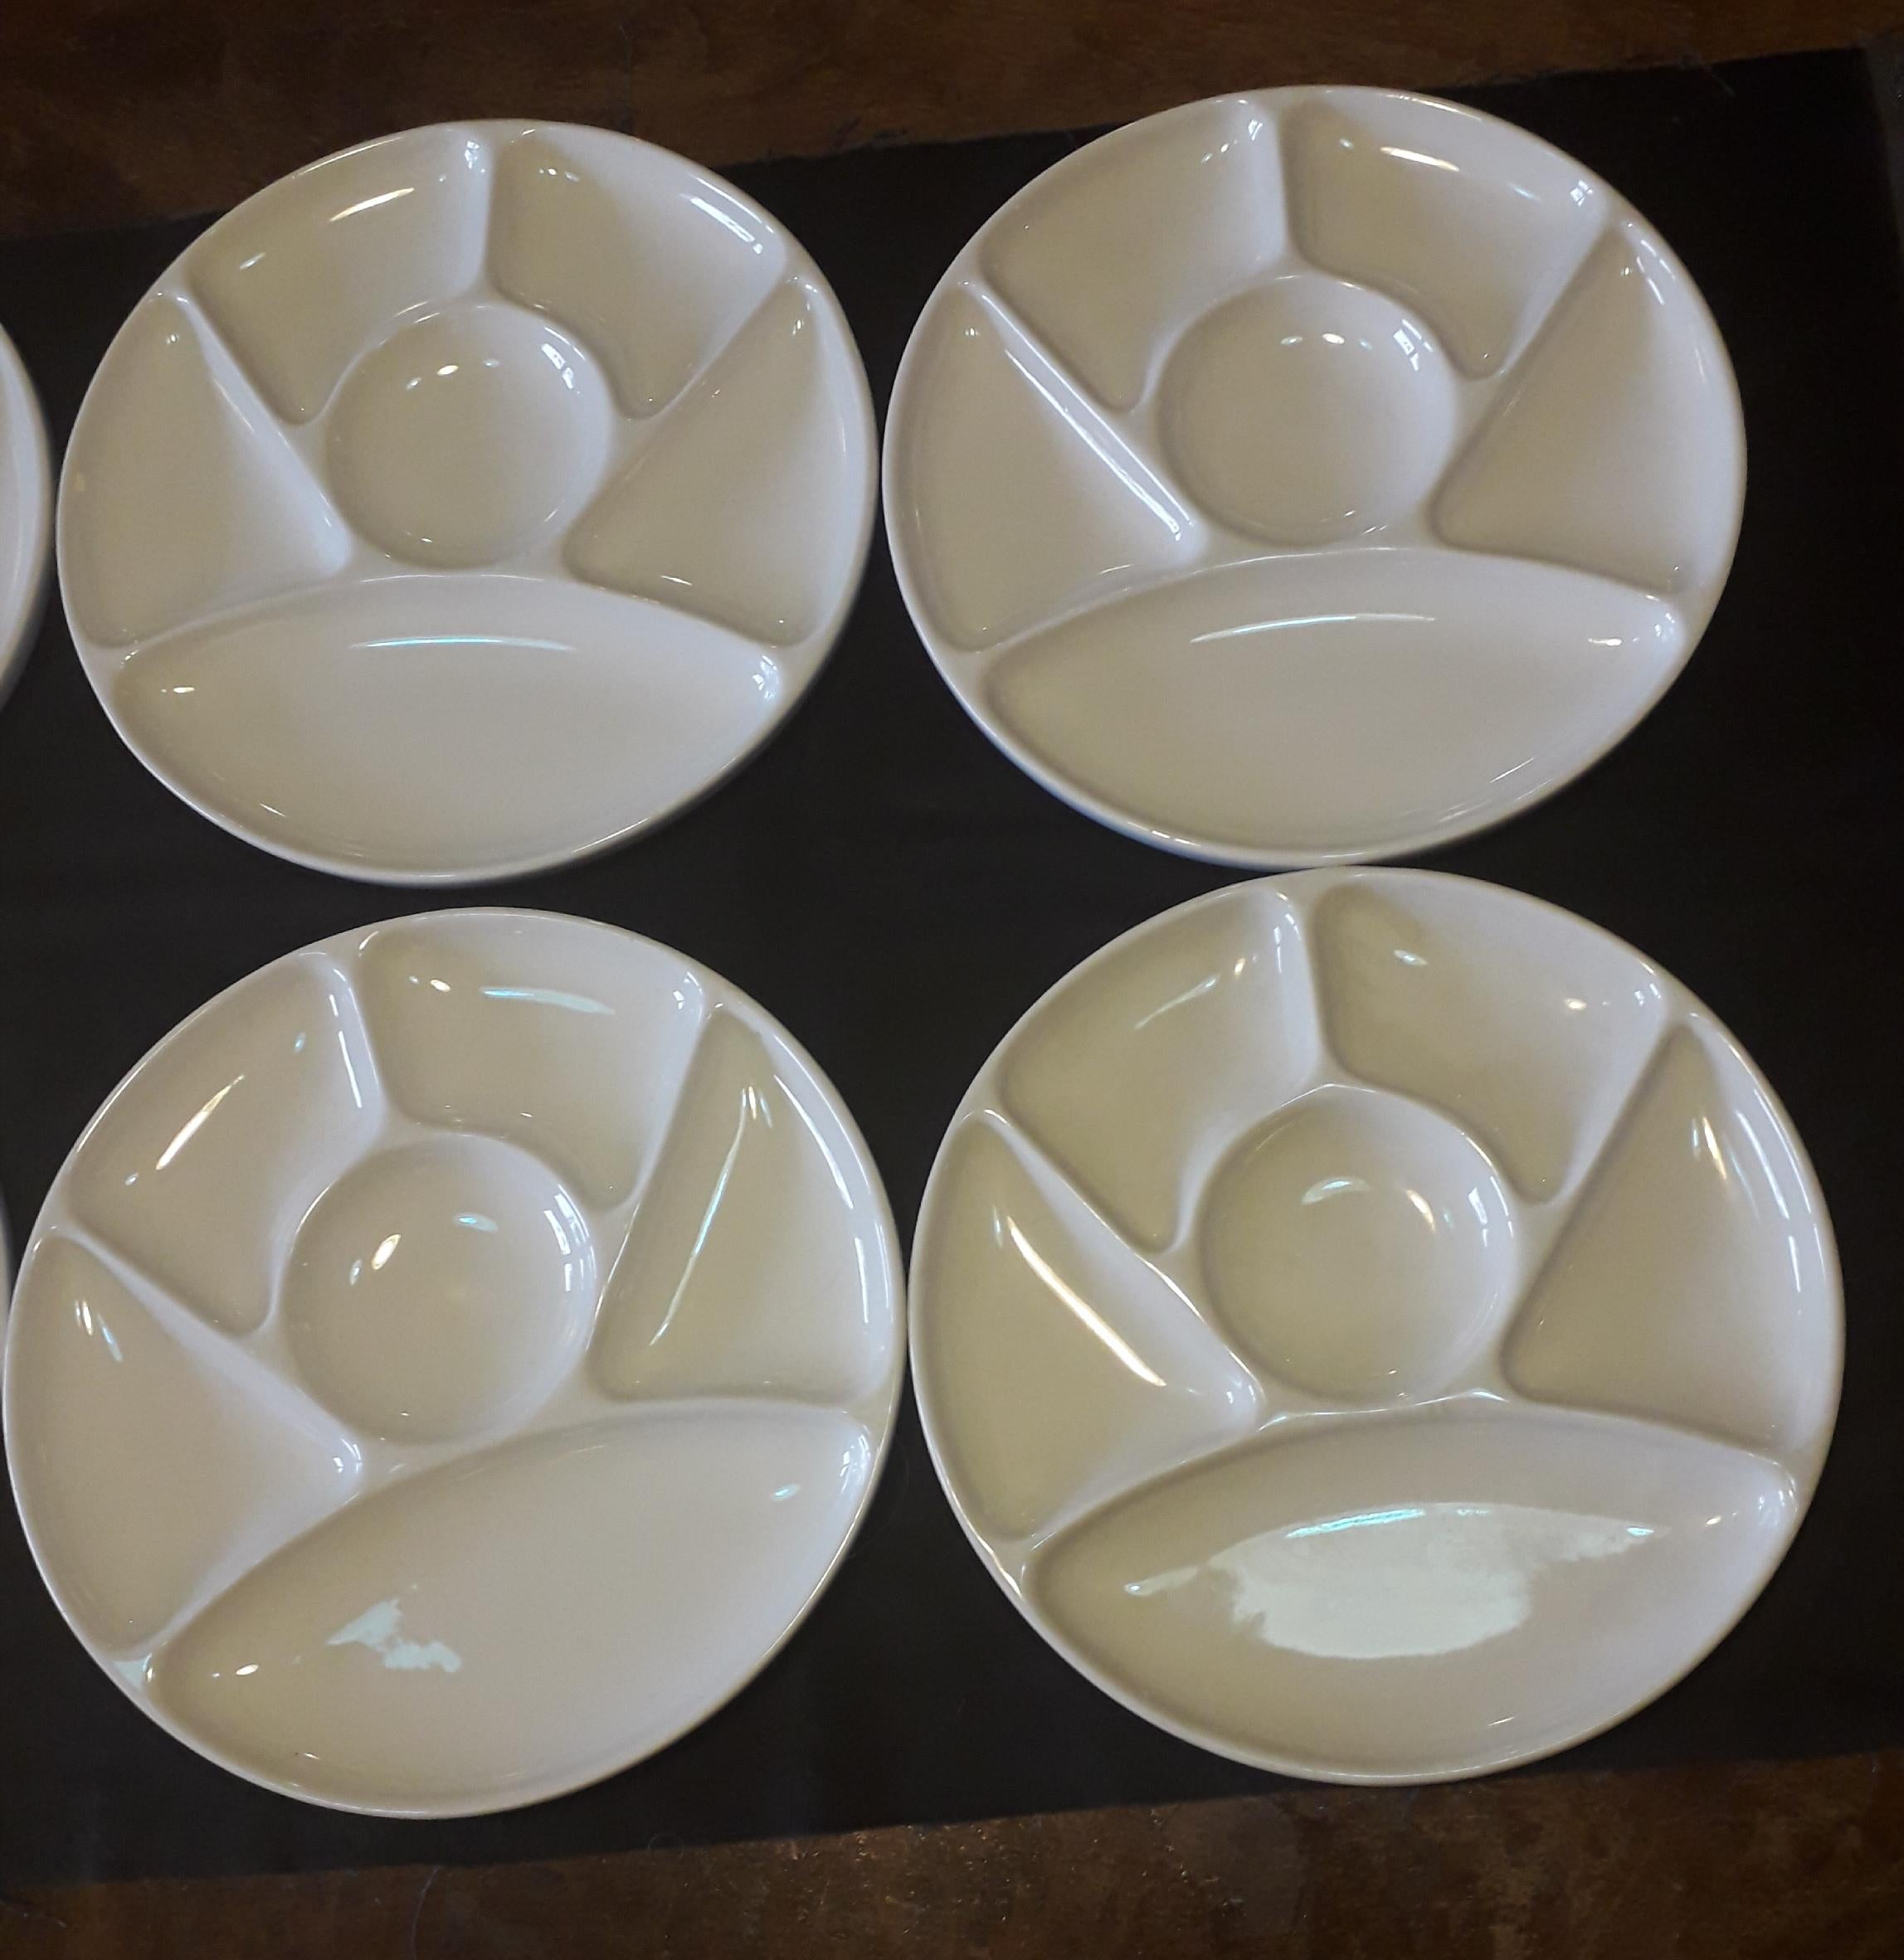 Enameled Set of Ten Faience Fondue White Diner Plates Dishes, by Gien, France